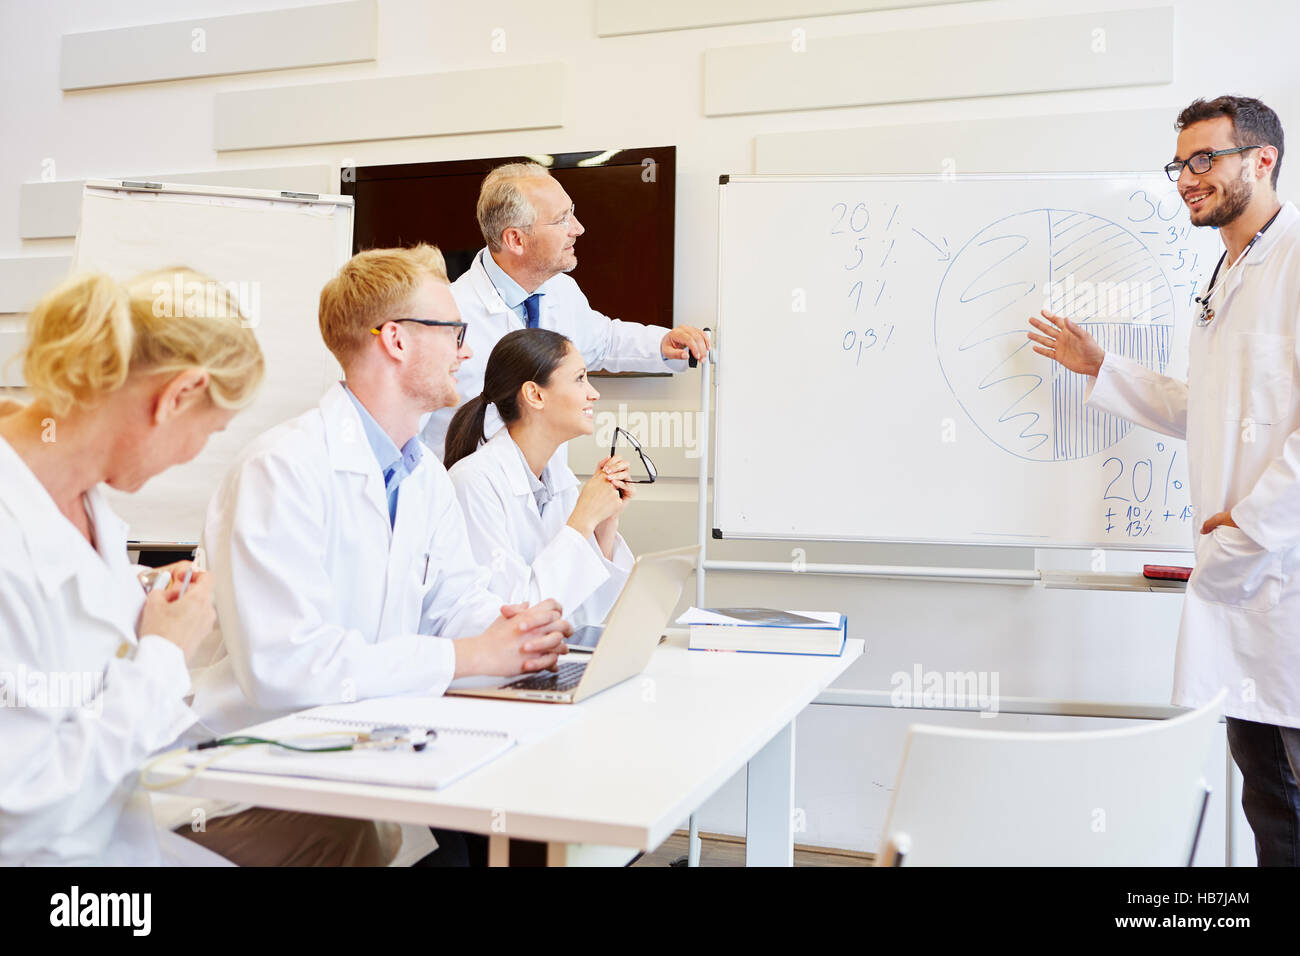 Doctors in training during seminar with flipchart Stock Photo